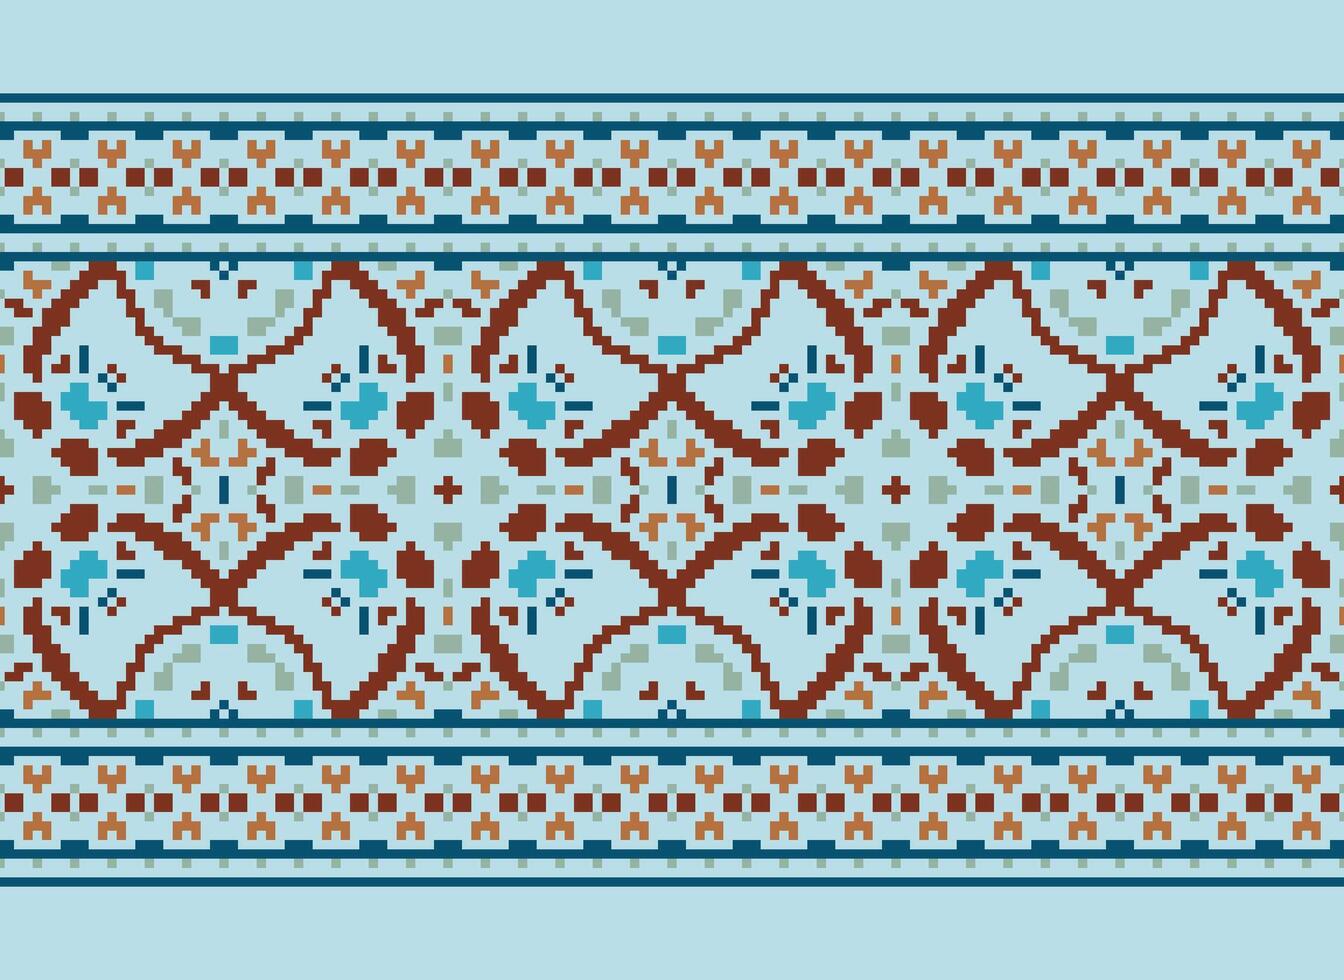 Cross Stitch pattern with Floral Designs. Traditional cross stitch needlework. Geometric Ethnic pattern, Embroidery, Textile ornamentation, fabric, Hand stitched pattern, Cultural stitching pixel art. vector